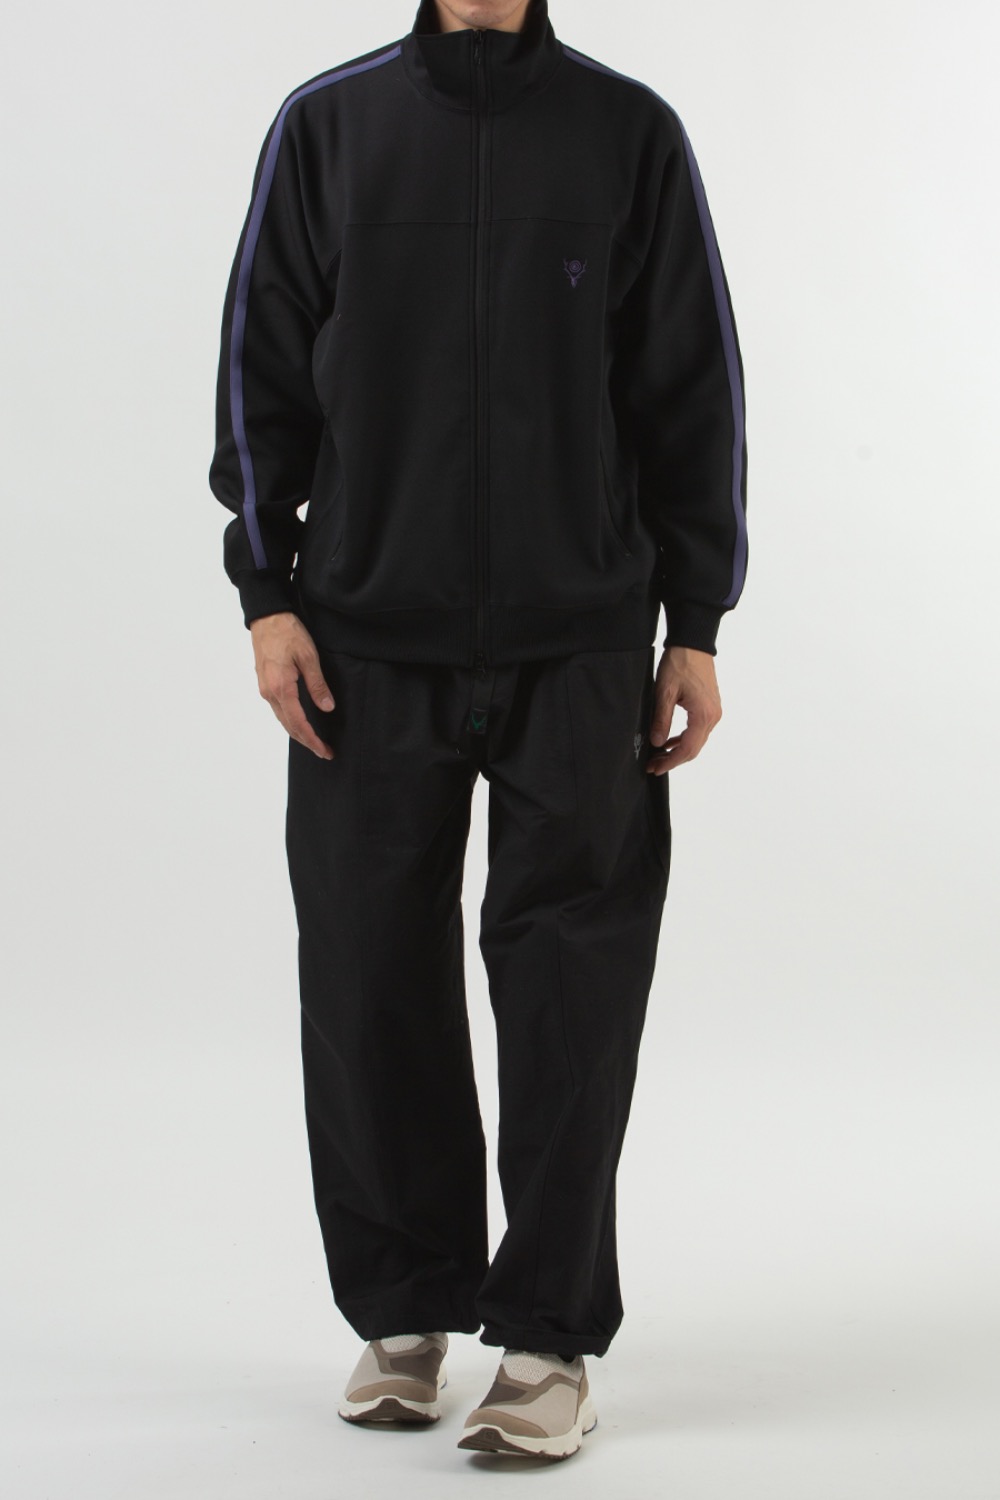 TRAINER JACKET - POLY SMOOTH BLACK